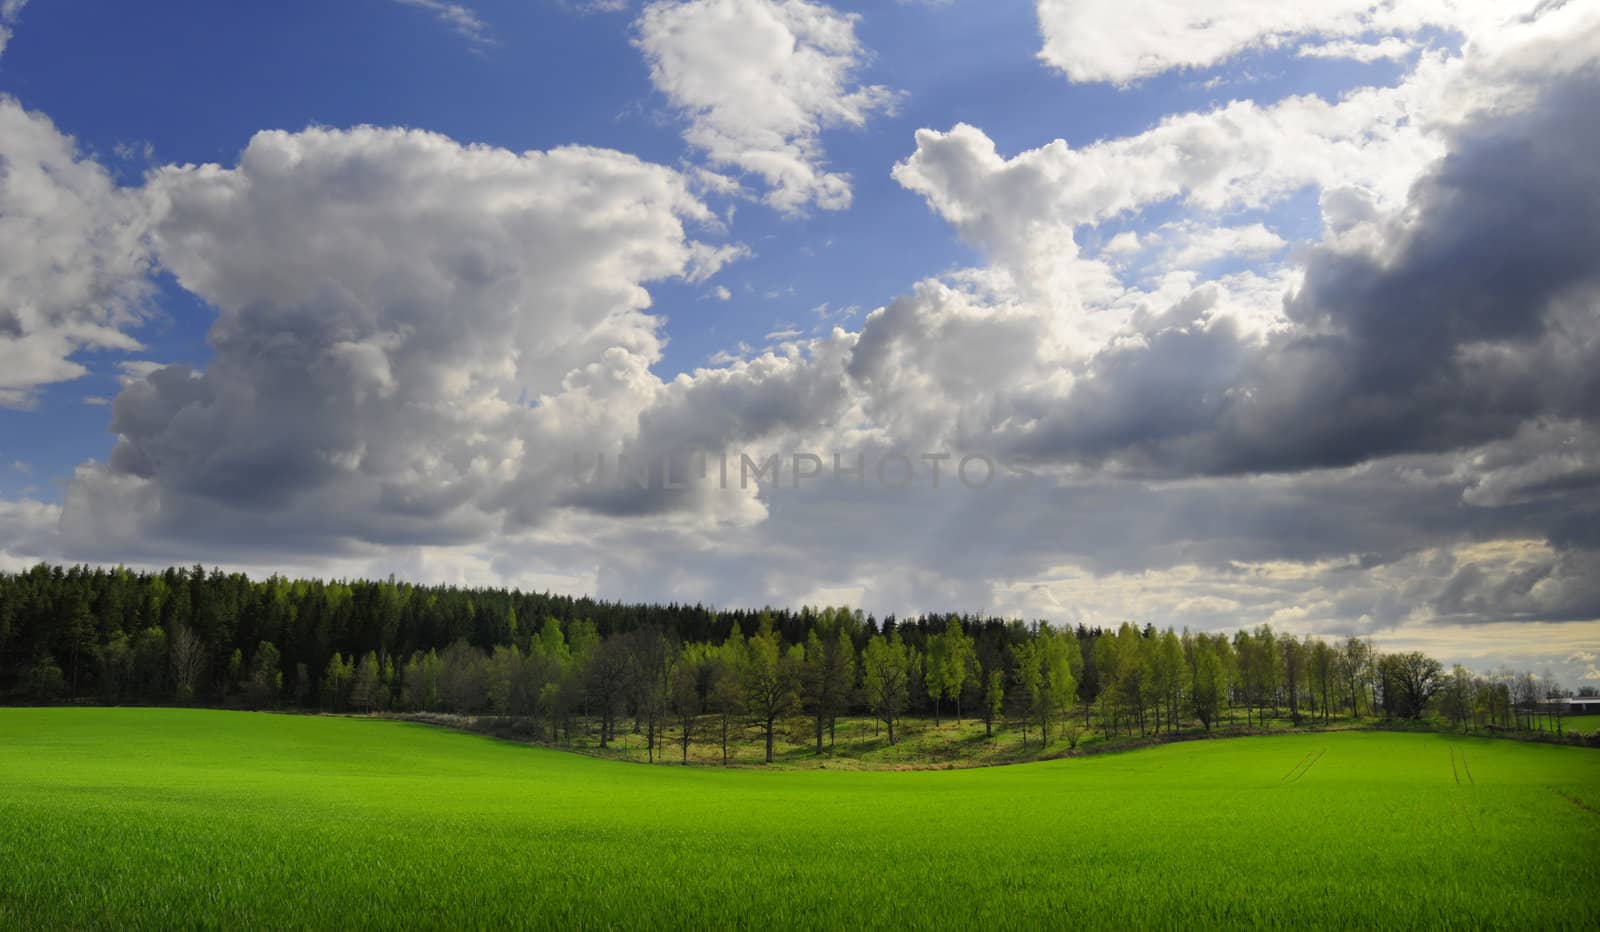 Perfect green field with trees and blue sky with clouds in the background